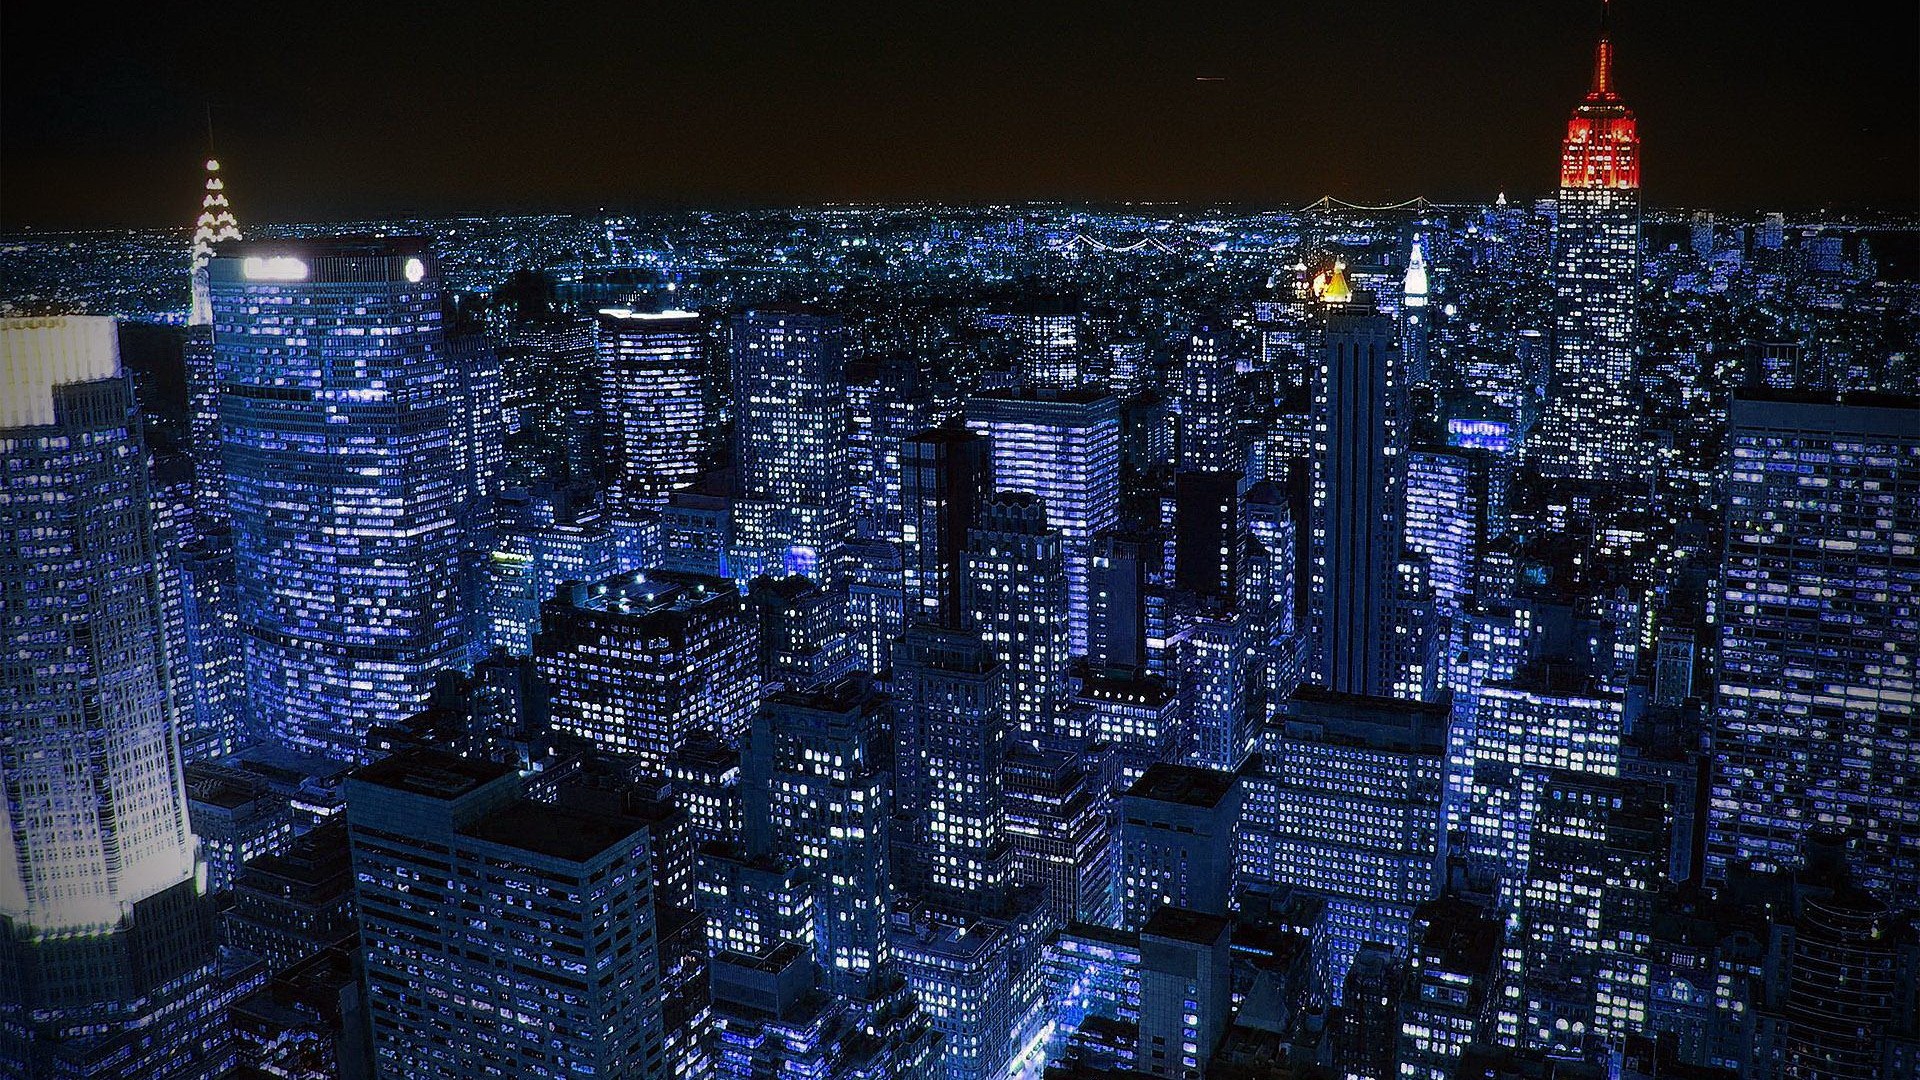 1920x1080 -Cityscapes-Night-Lights-New-York-City-Scenic-Skyscapes-Fresh-New-Hd- Wallpaper–(1)